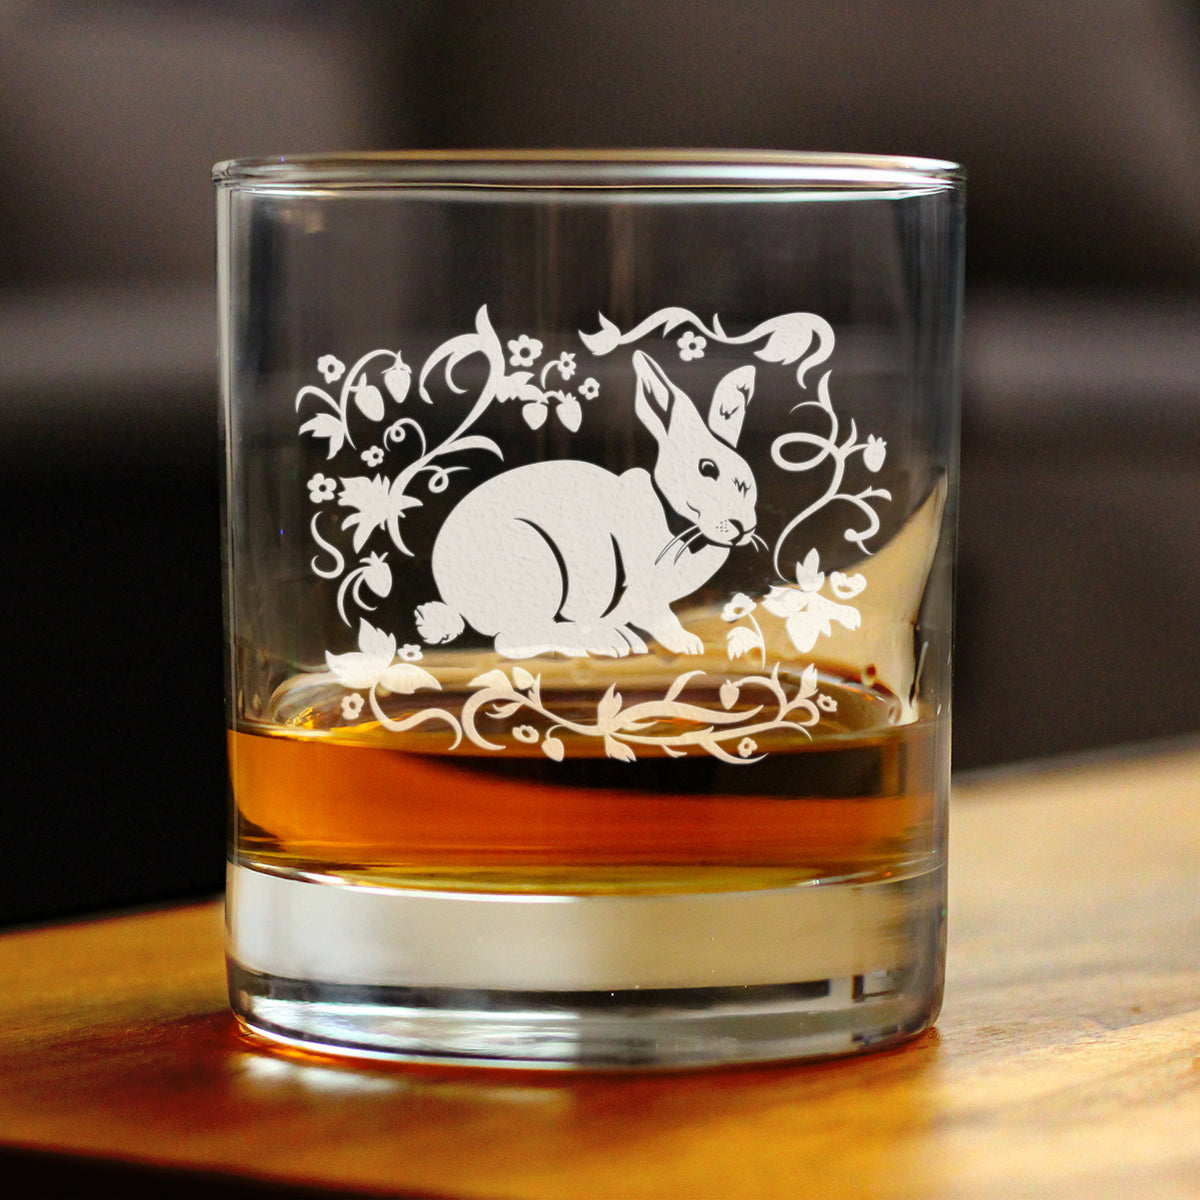 Berry Patch Bunny Rabbit - Whiskey Rocks Glass - Hand Engraved Gifts for Men &amp; Women That Love Bunnies